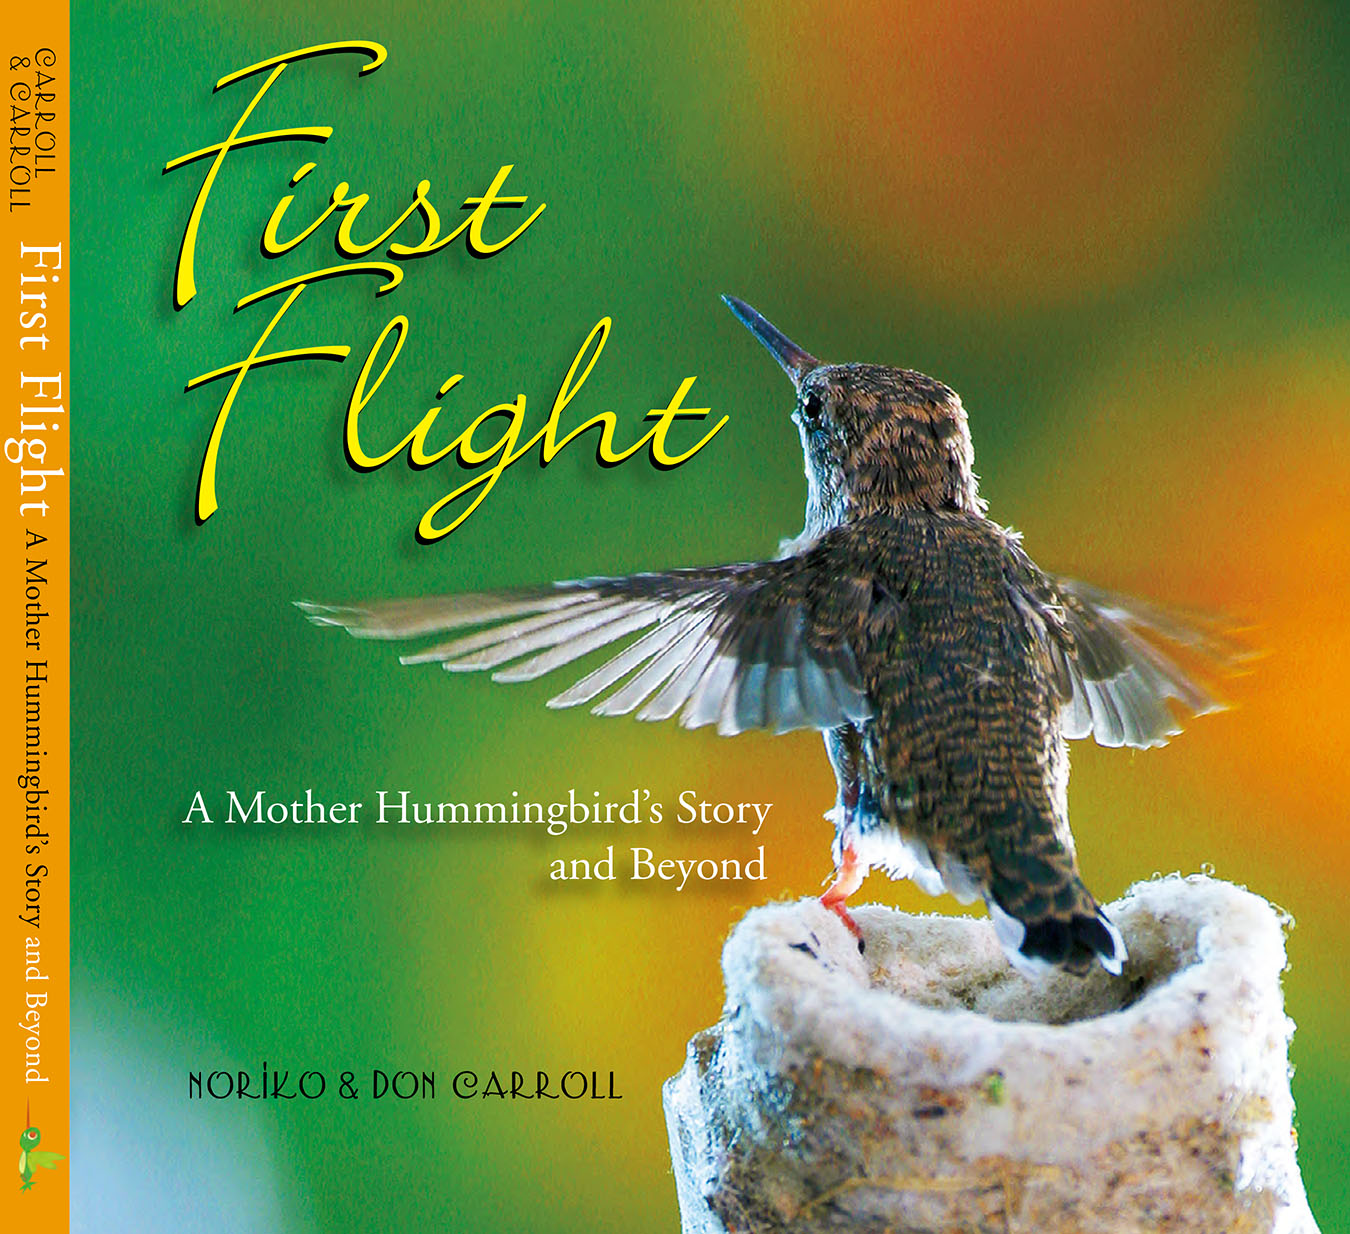 First Flight is the beautifully photographed story of Honey and her two chicks, Ray and Zen. In over fifty stunning, full-color close-ups, it captures the grace, the beauty, and the simultaneous strength and fragility of one of nature's tiniest birds. Professional photographer Don Carroll's images of his tiny housemates are woven throughout with Noriko's charming narrative describing the mother bird and her developing brood. Not just for bird enthusiasts, First Flight is a magical mix of hummingbird field guide, personal story, and new life taking flight. Readers will be captivated by the inherent drama as it unfolds in miniature, and they'll cheer as babies Ray and Zen make their own first flights out into a bright new world.